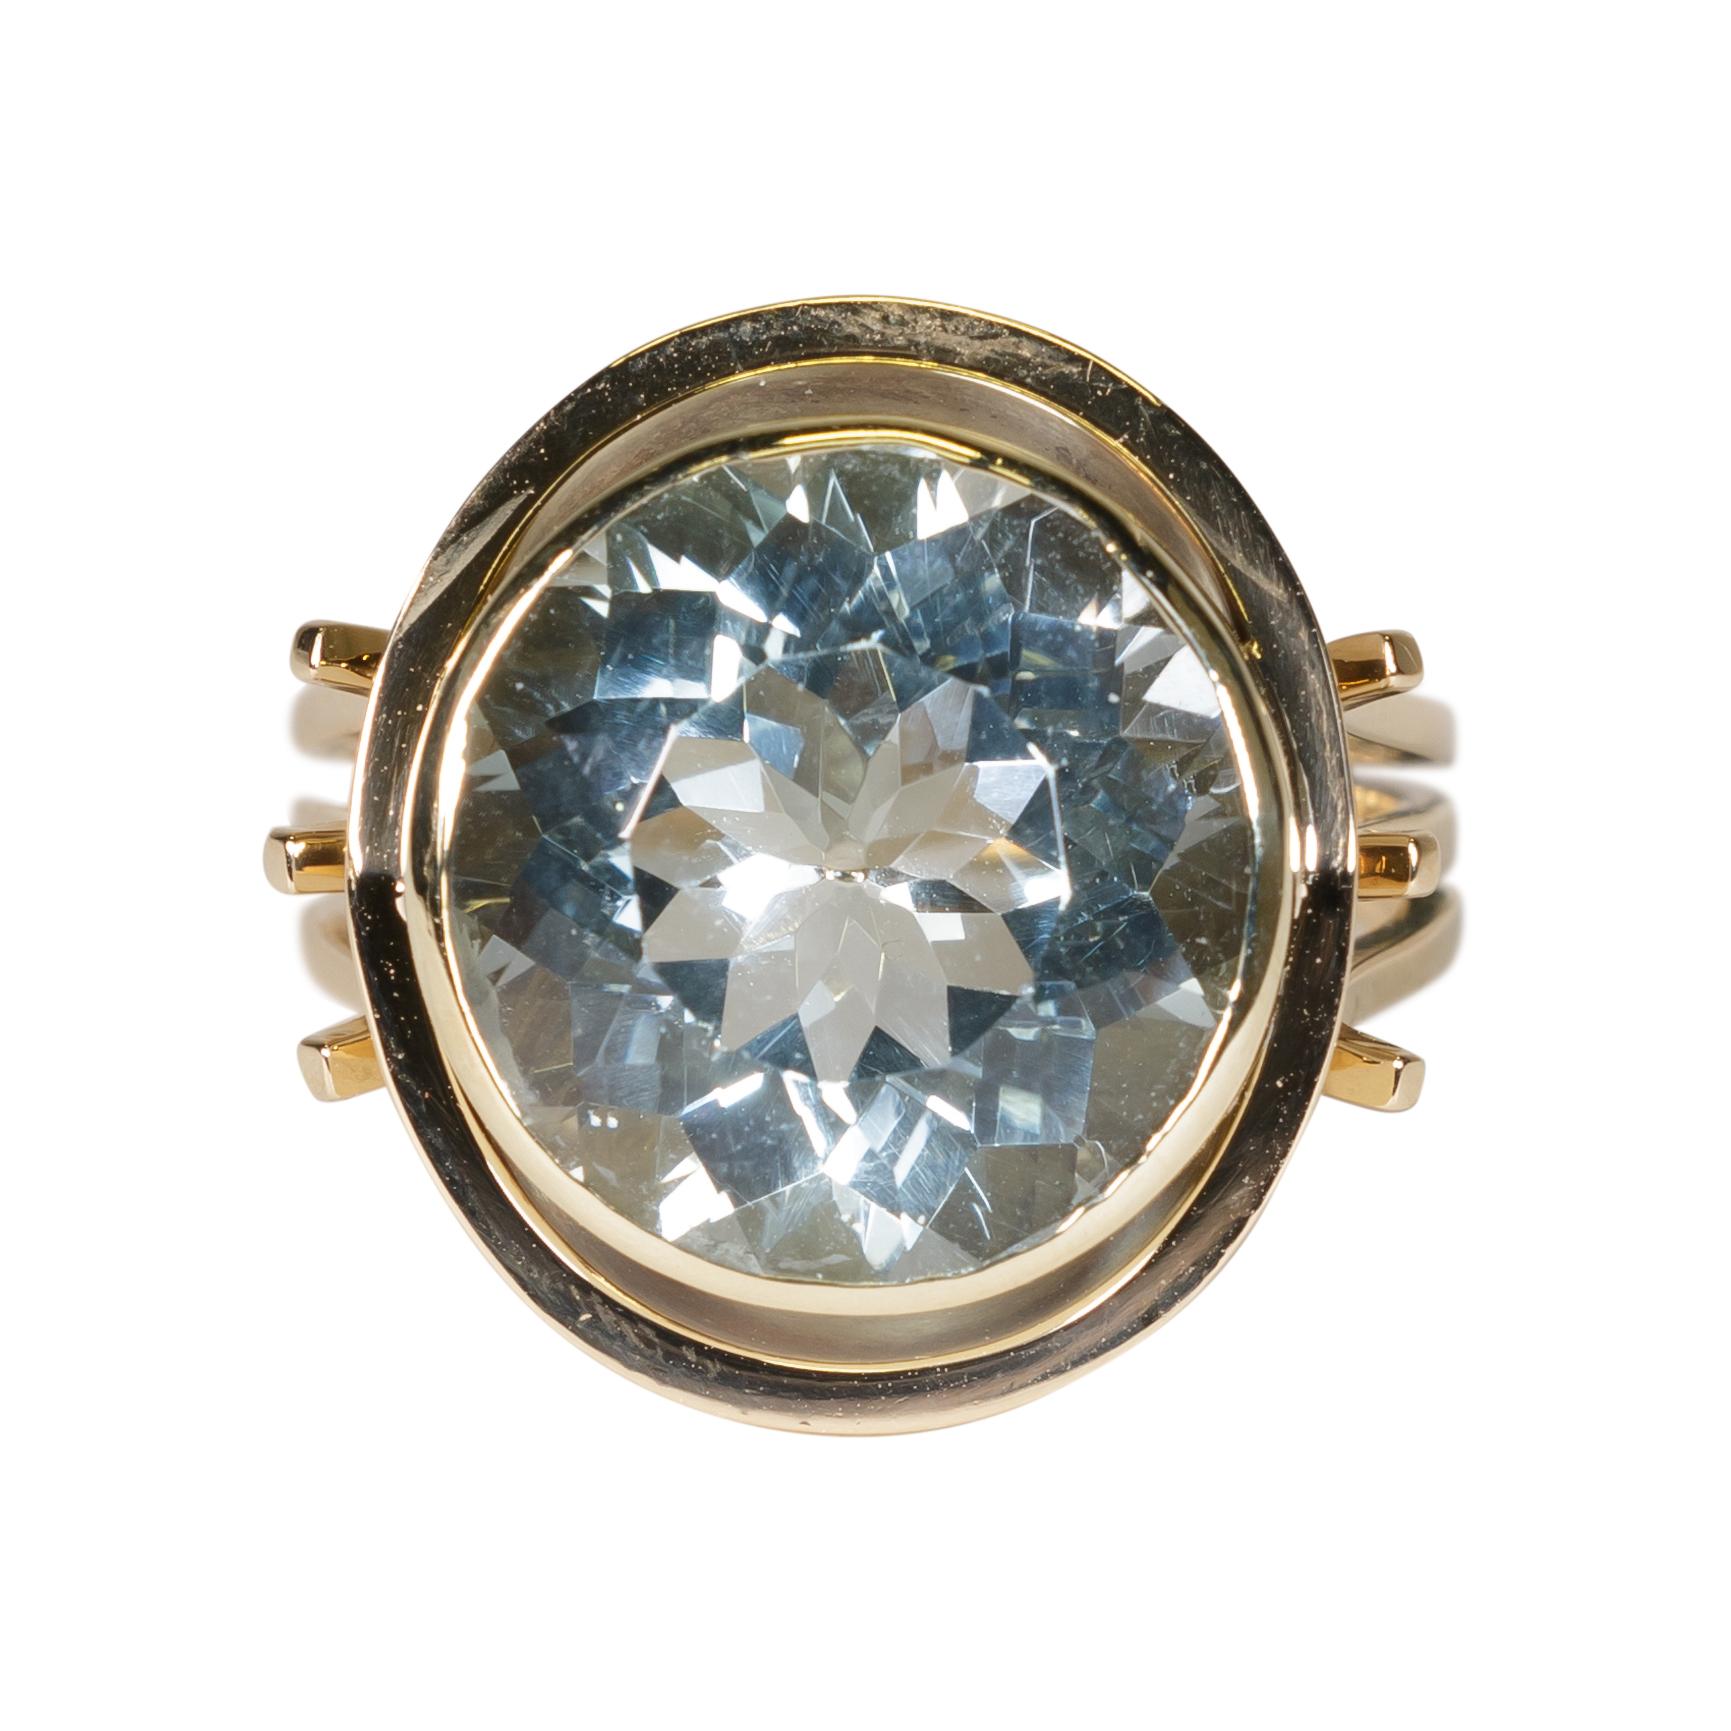 Ladies gold ring stamped 585. Center aqua stone set in a bezel around which is a gold frame with an airline style shank consisting of three rings soldered together at bottom. Mounting weight 6.48 dwt, aqua 14 x 14 x 8.5mm, weighing 9.06 carats,